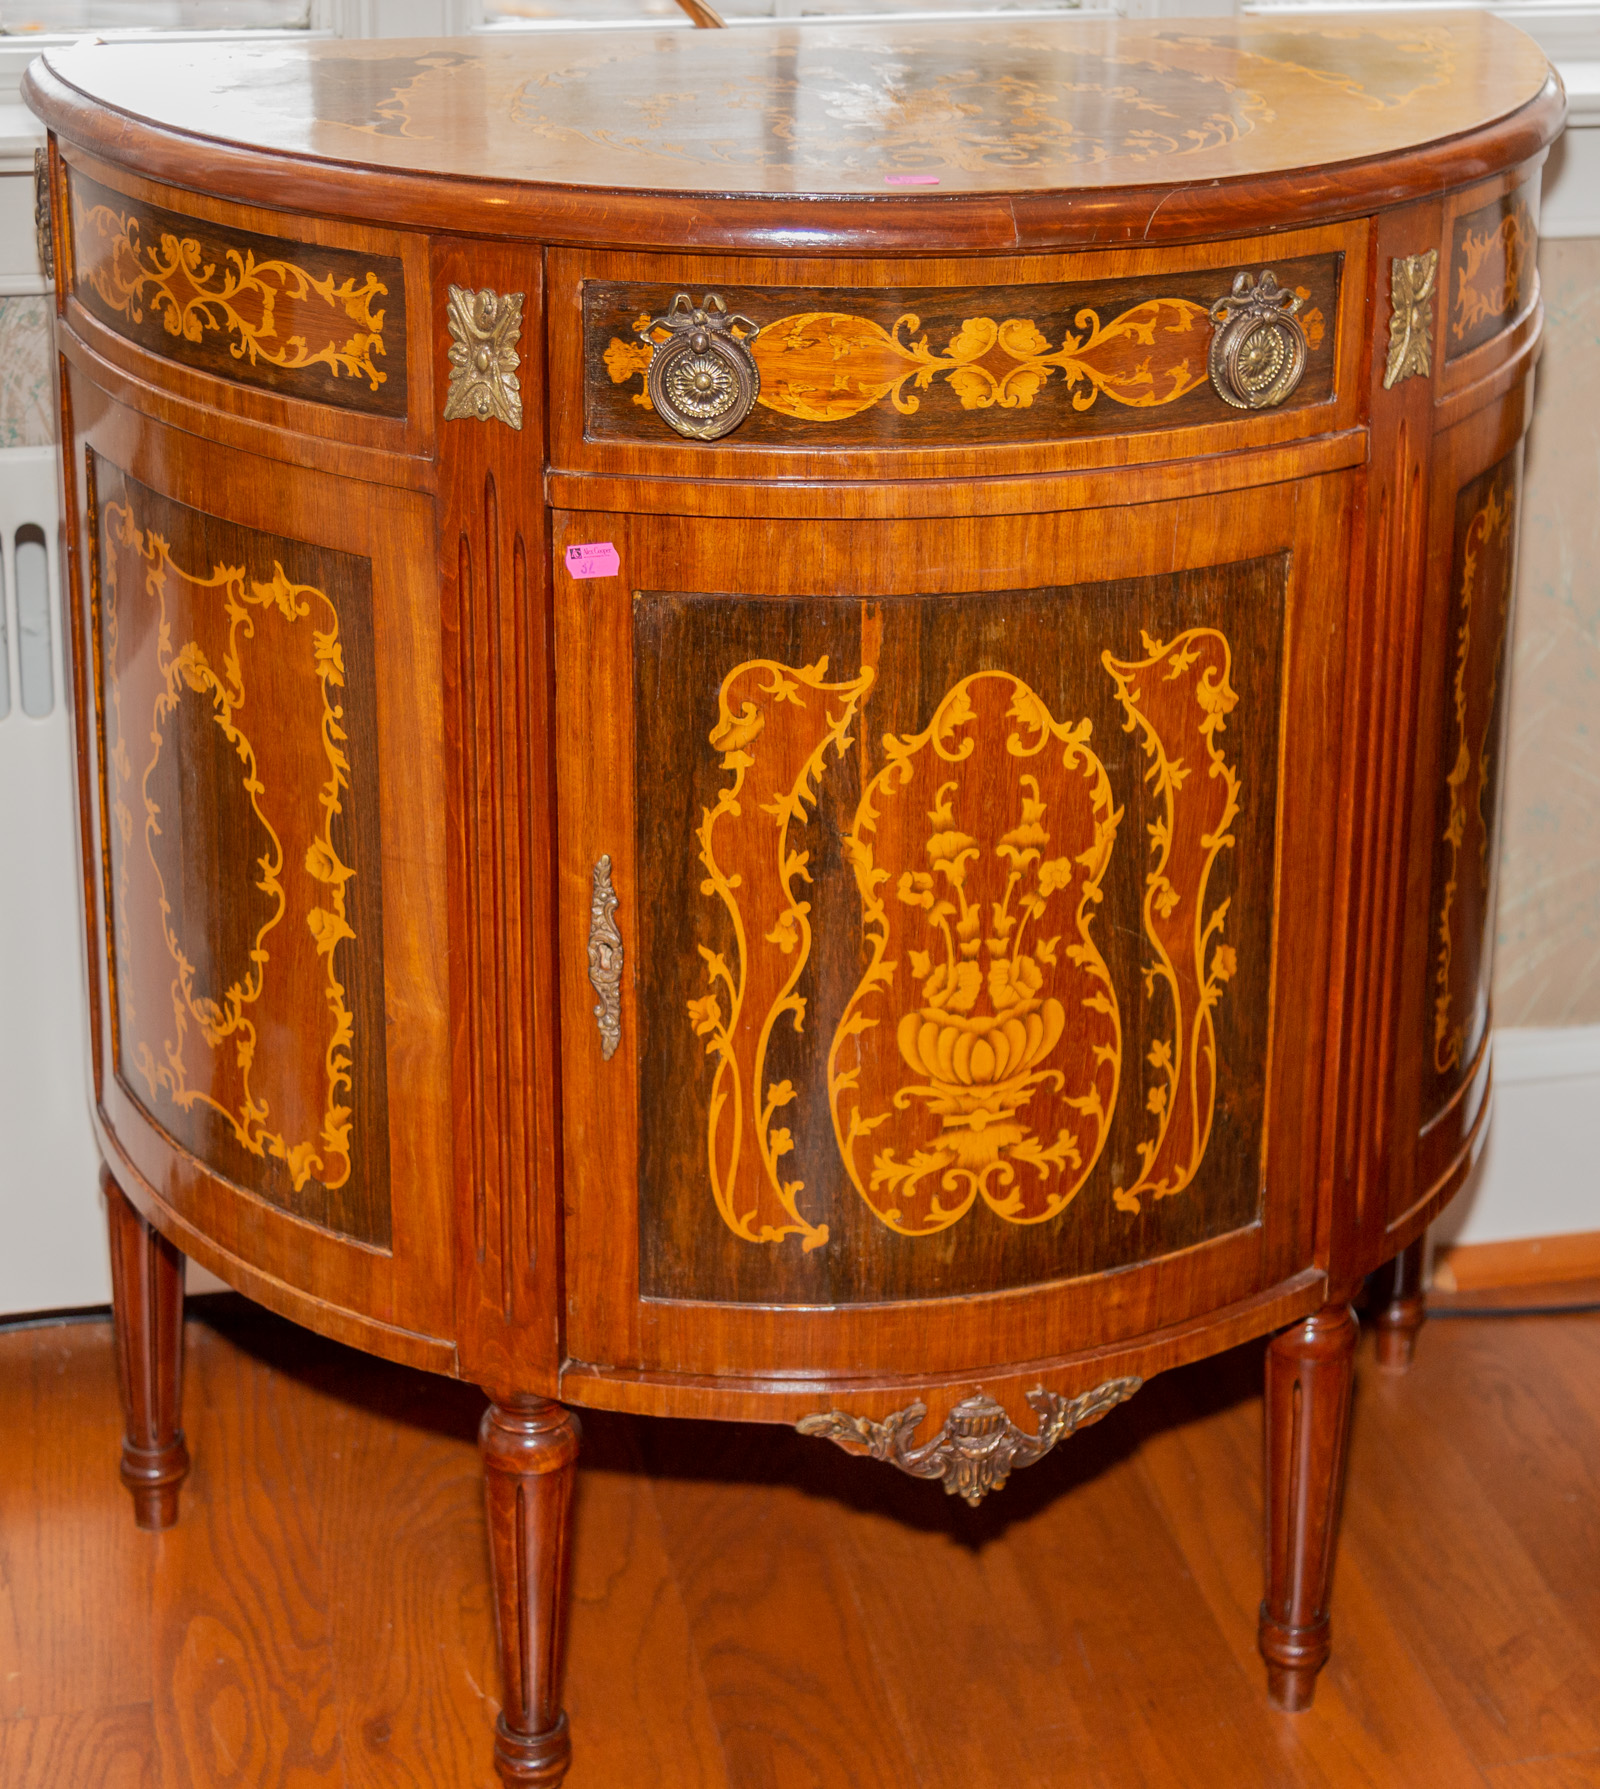 A LOUIS XV STYLE MARQUETRY DEMILUNE 36a22f